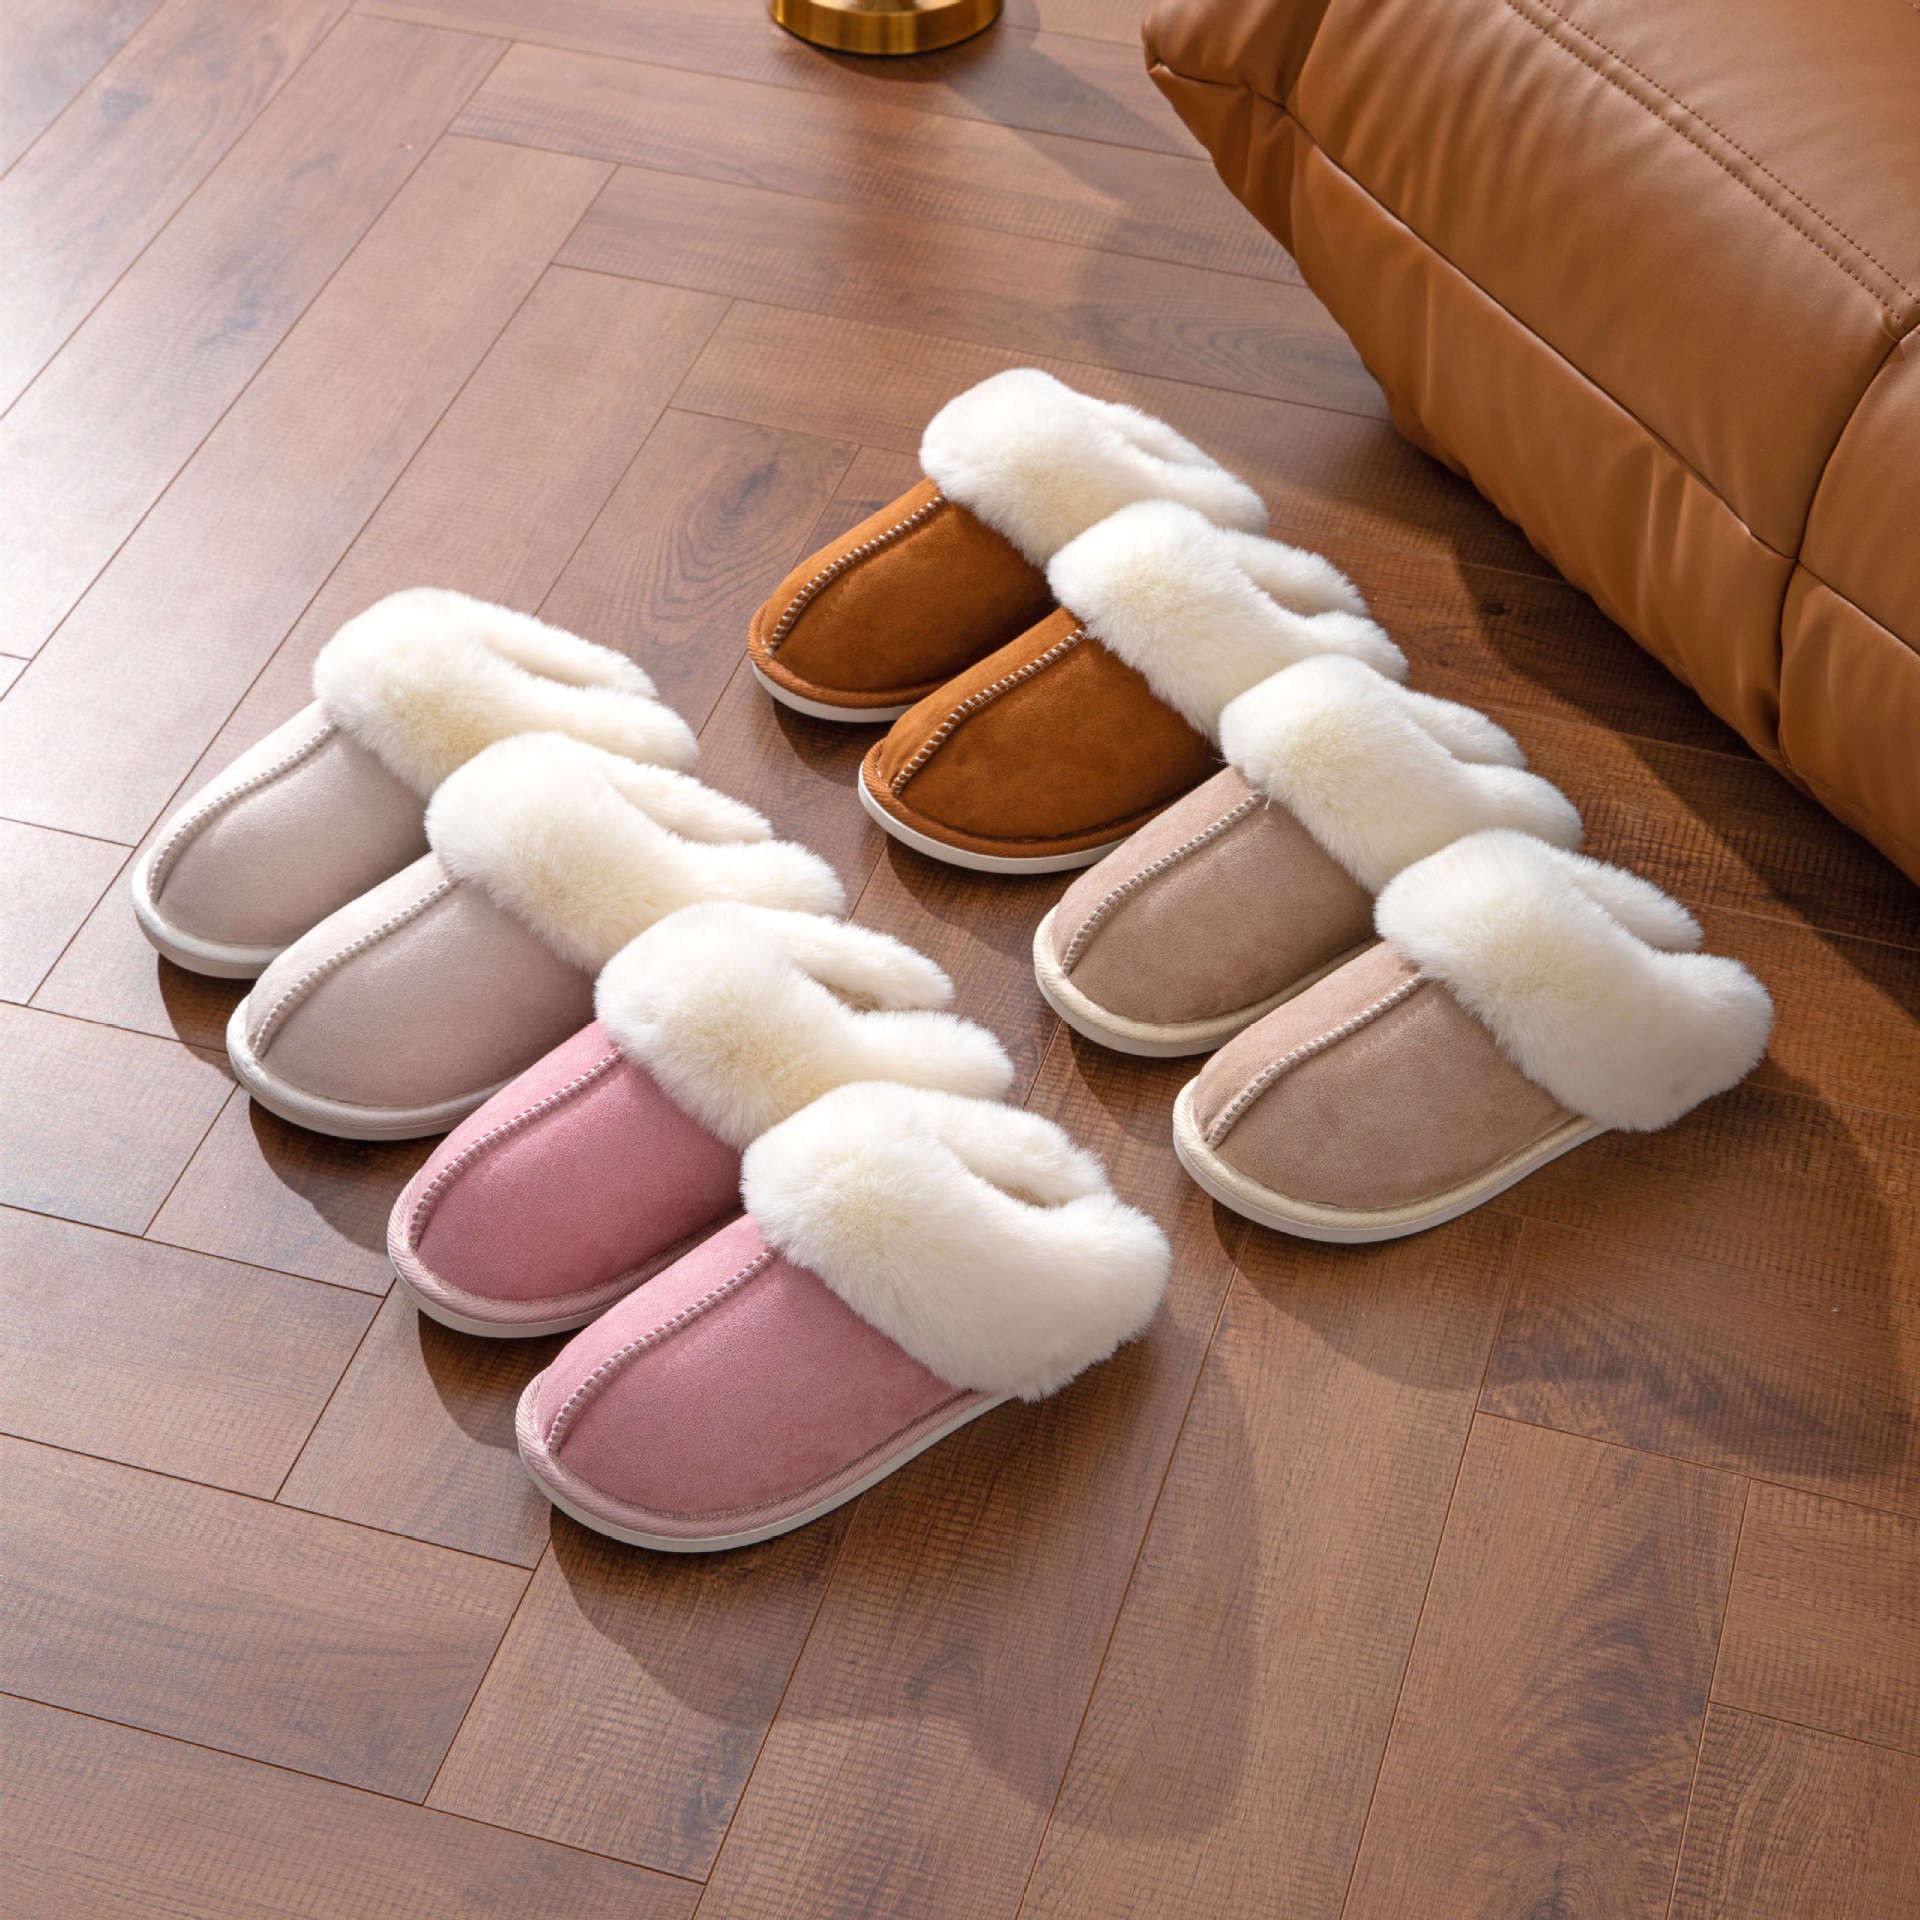 cross-border in stock home cotton slippers can be worn outside korean style bag head cotton slippers indoor home non-slip neutral plush slippers